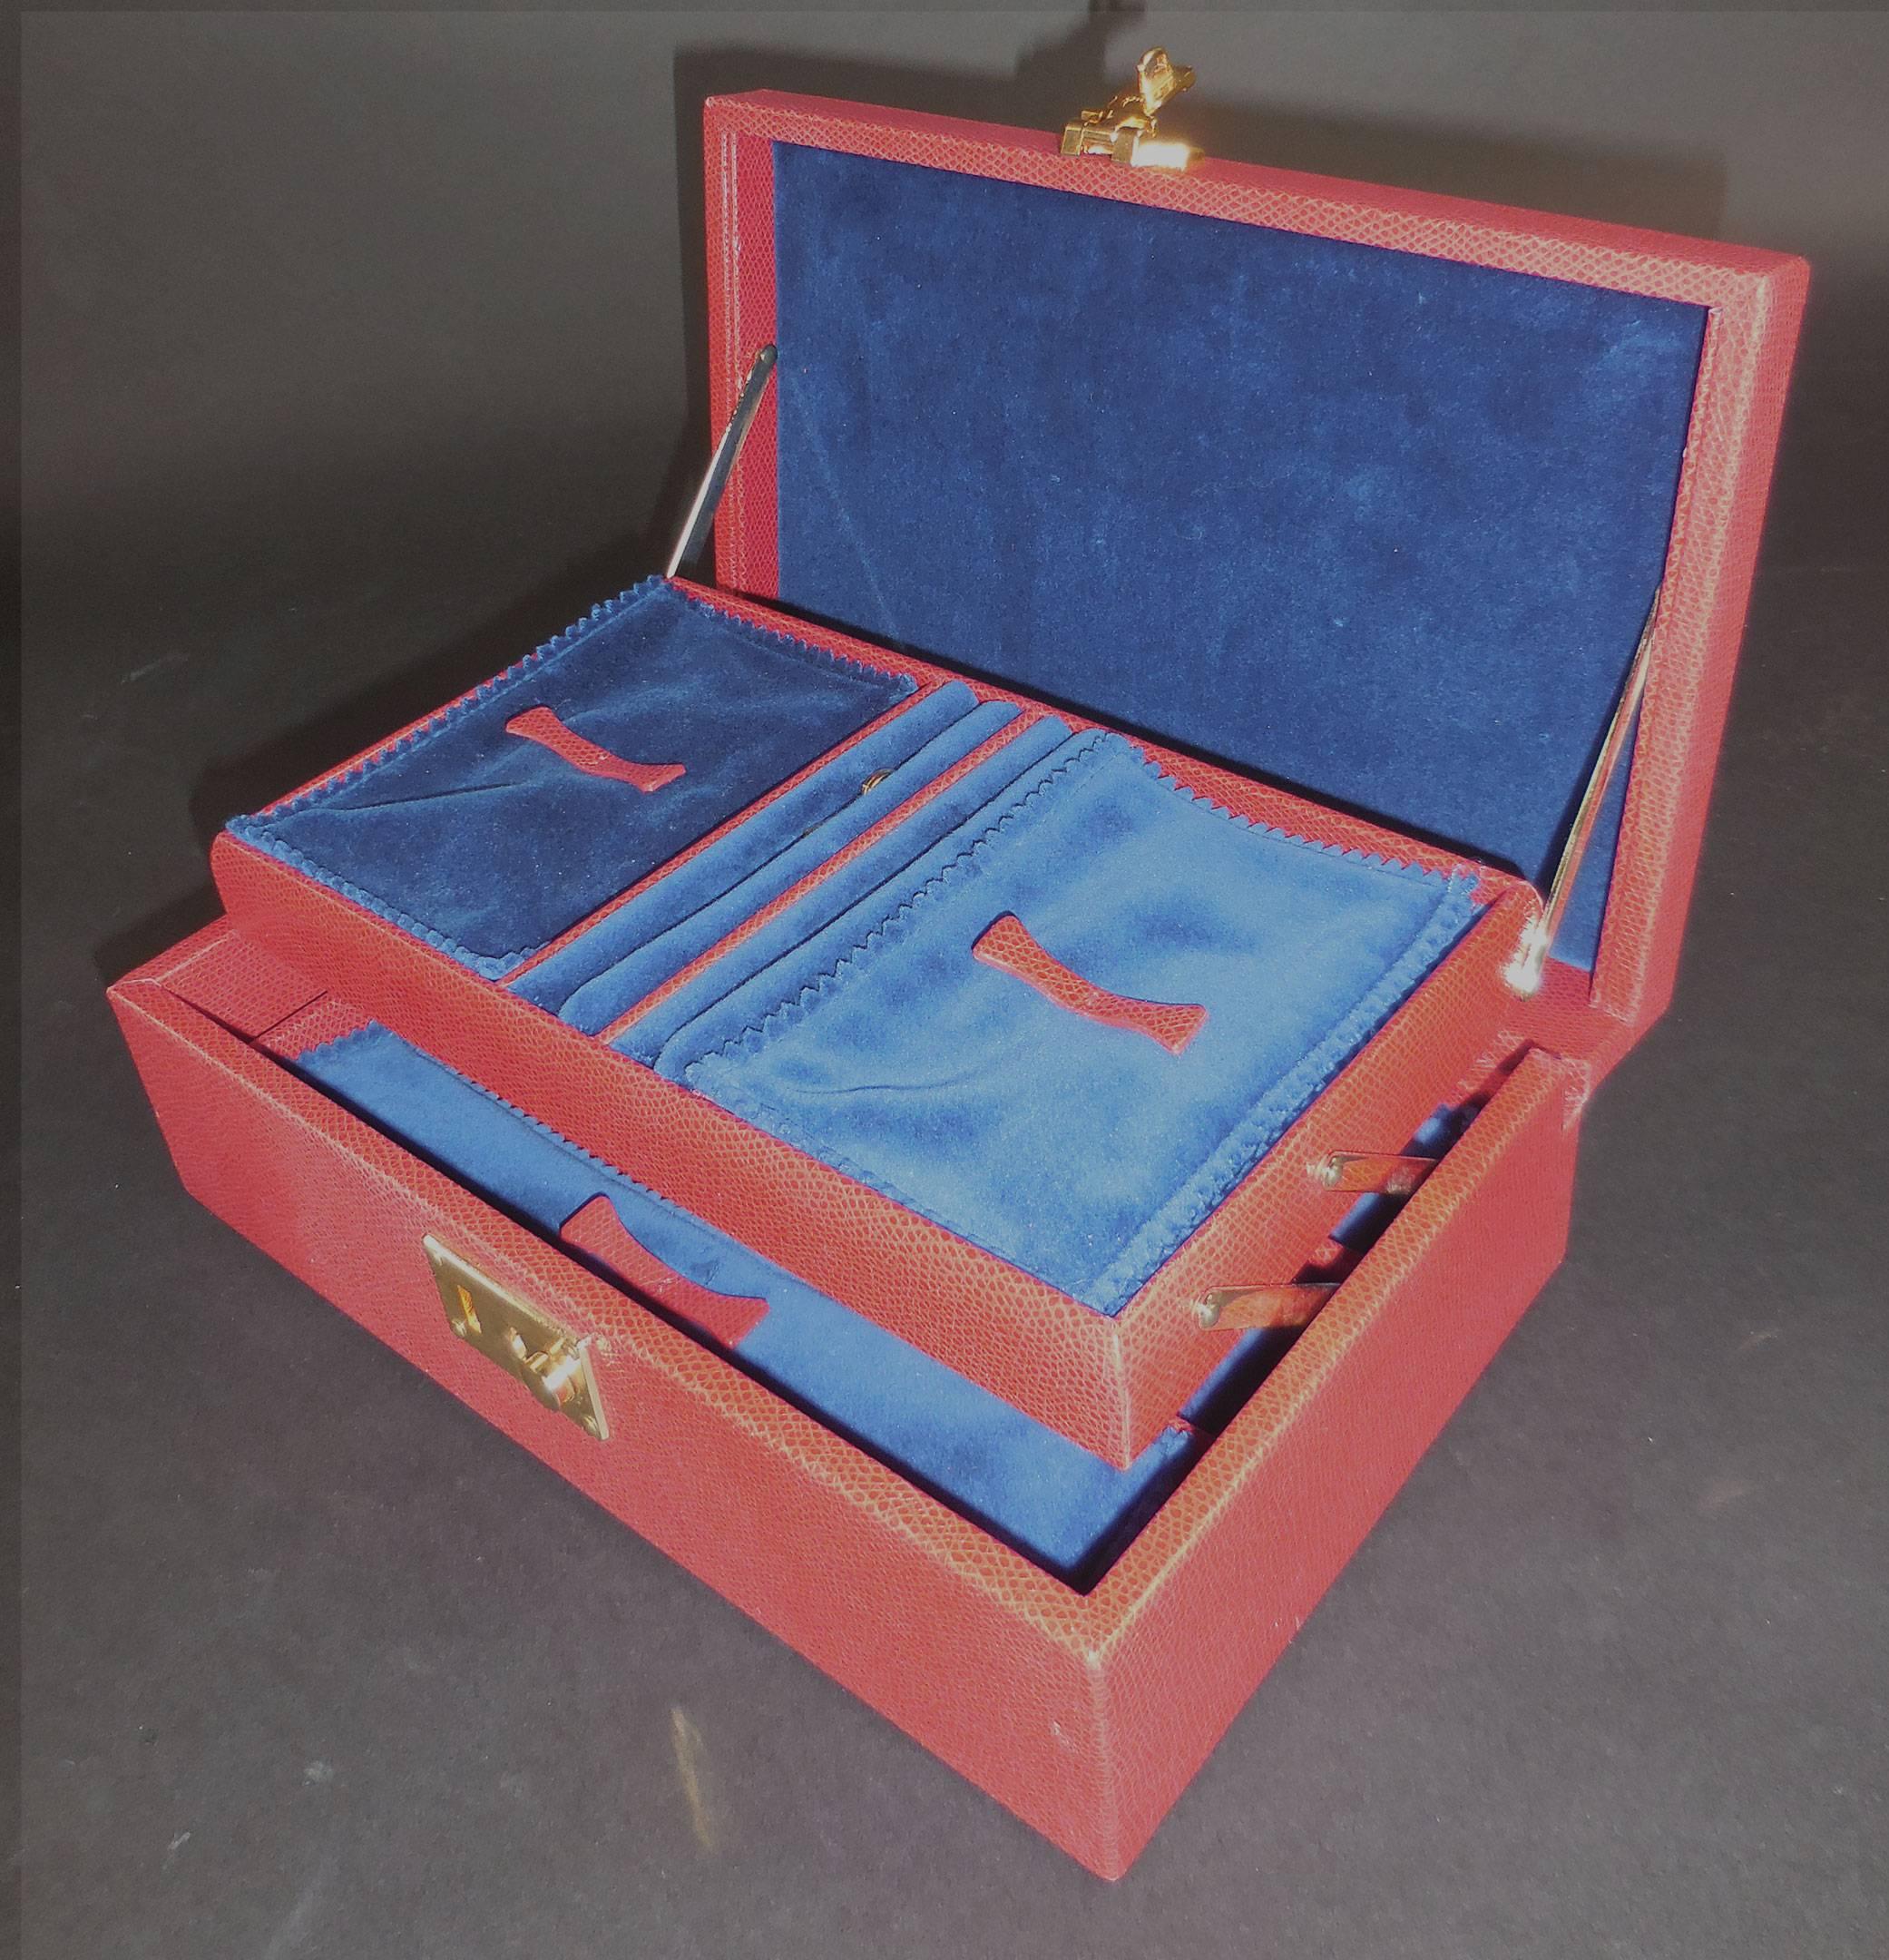 British Exquisite Tanner Krolle Red Leather Jewelry Case Box London, England